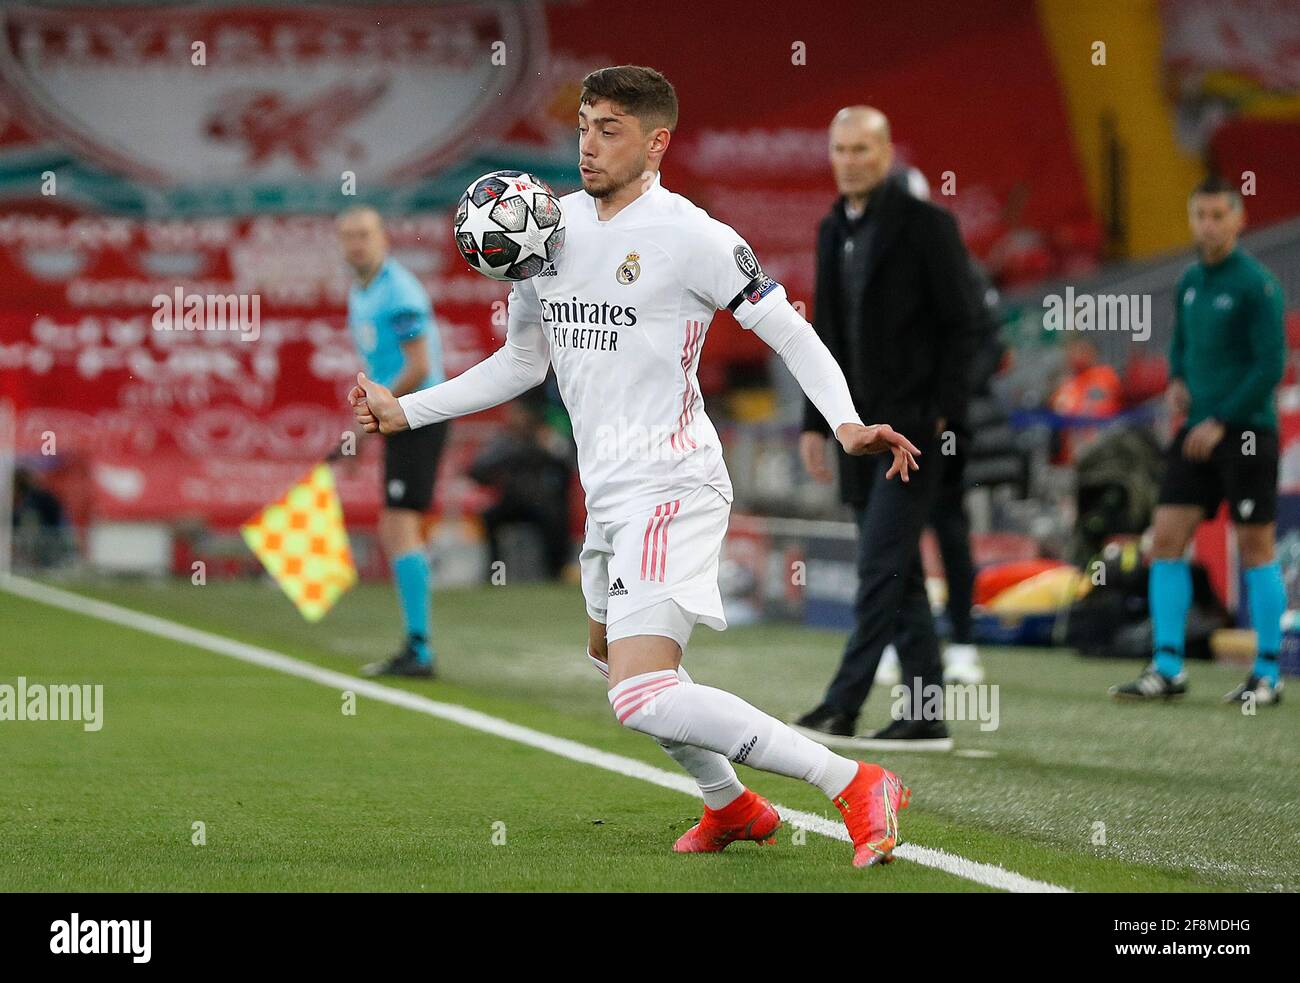 Liverpool, England, 14th April 2021.  Federico Valverde of Real Madrid during the UEFA Champions League match at Anfield, Liverpool. Picture credit should read: Darren Staples / Sportimage Stock Photo